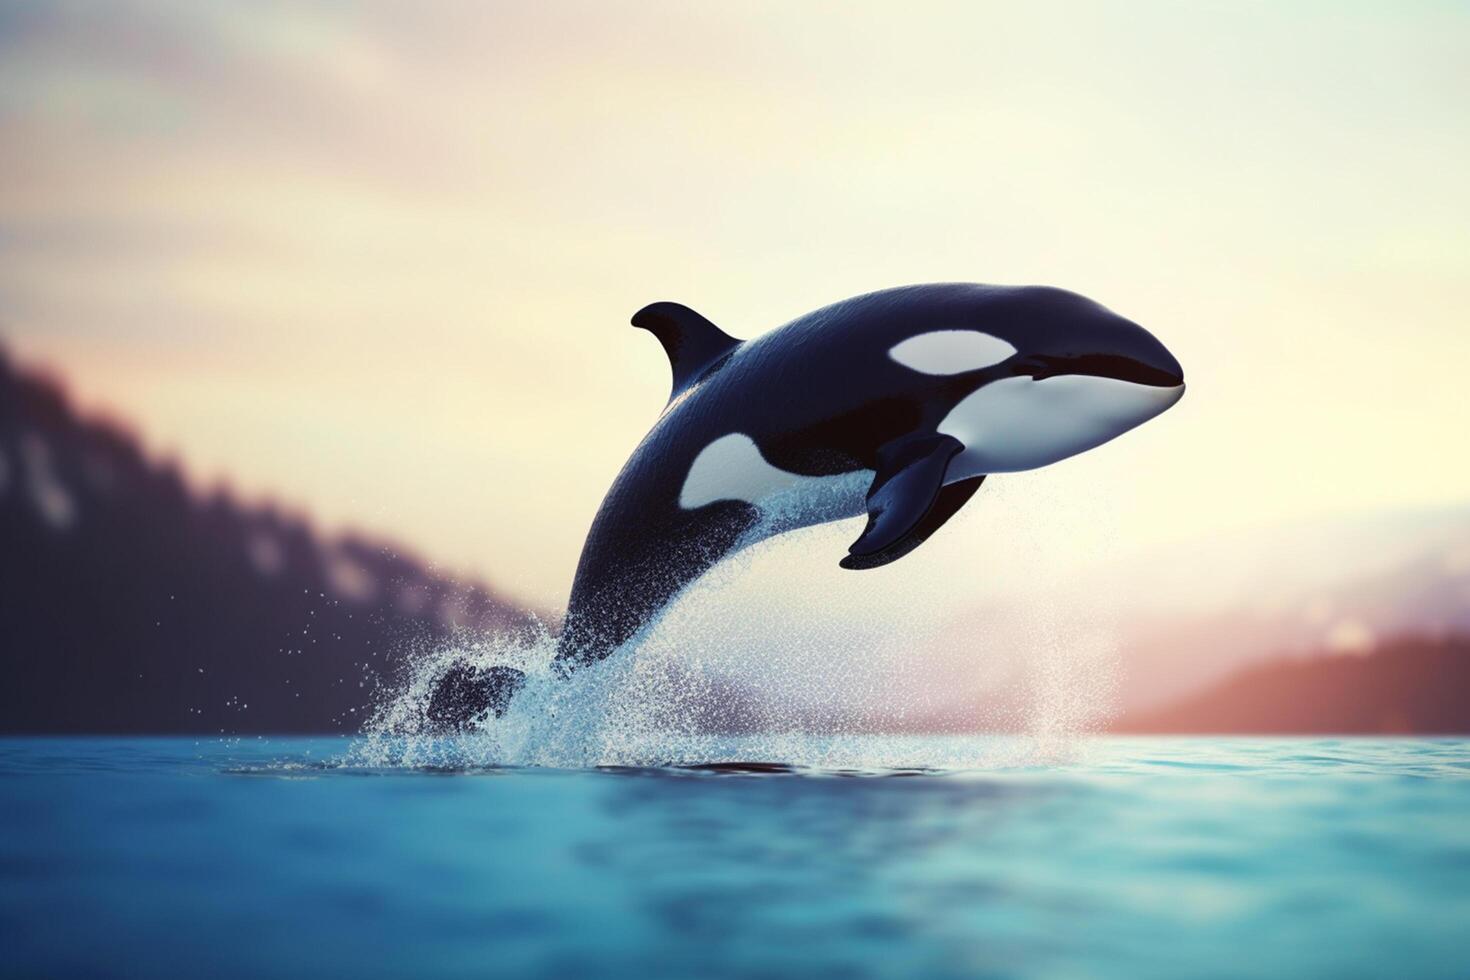 Leaping Orca Majestic Killer Whale in Full Flight photo